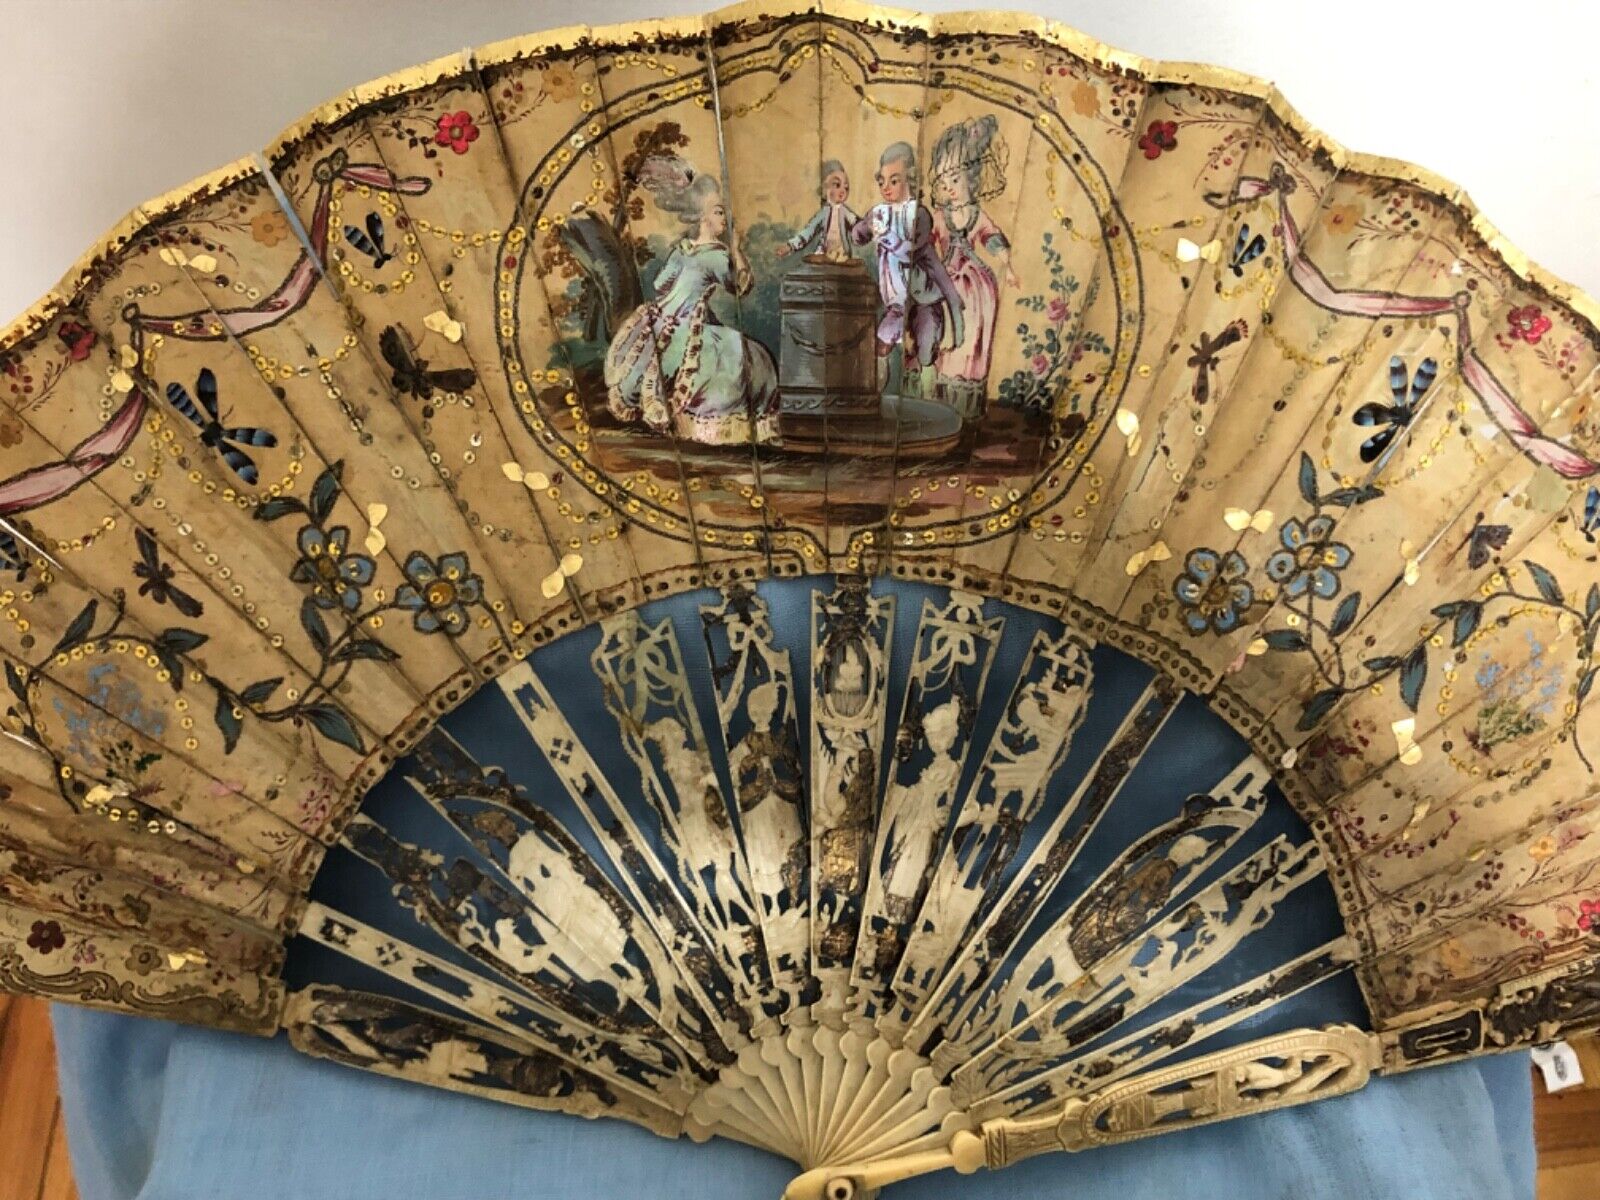 AMAZING ANTIQUE OPEN WORK AND GOLD HAND PAINTED  EMBROIDERY FAN c 1840